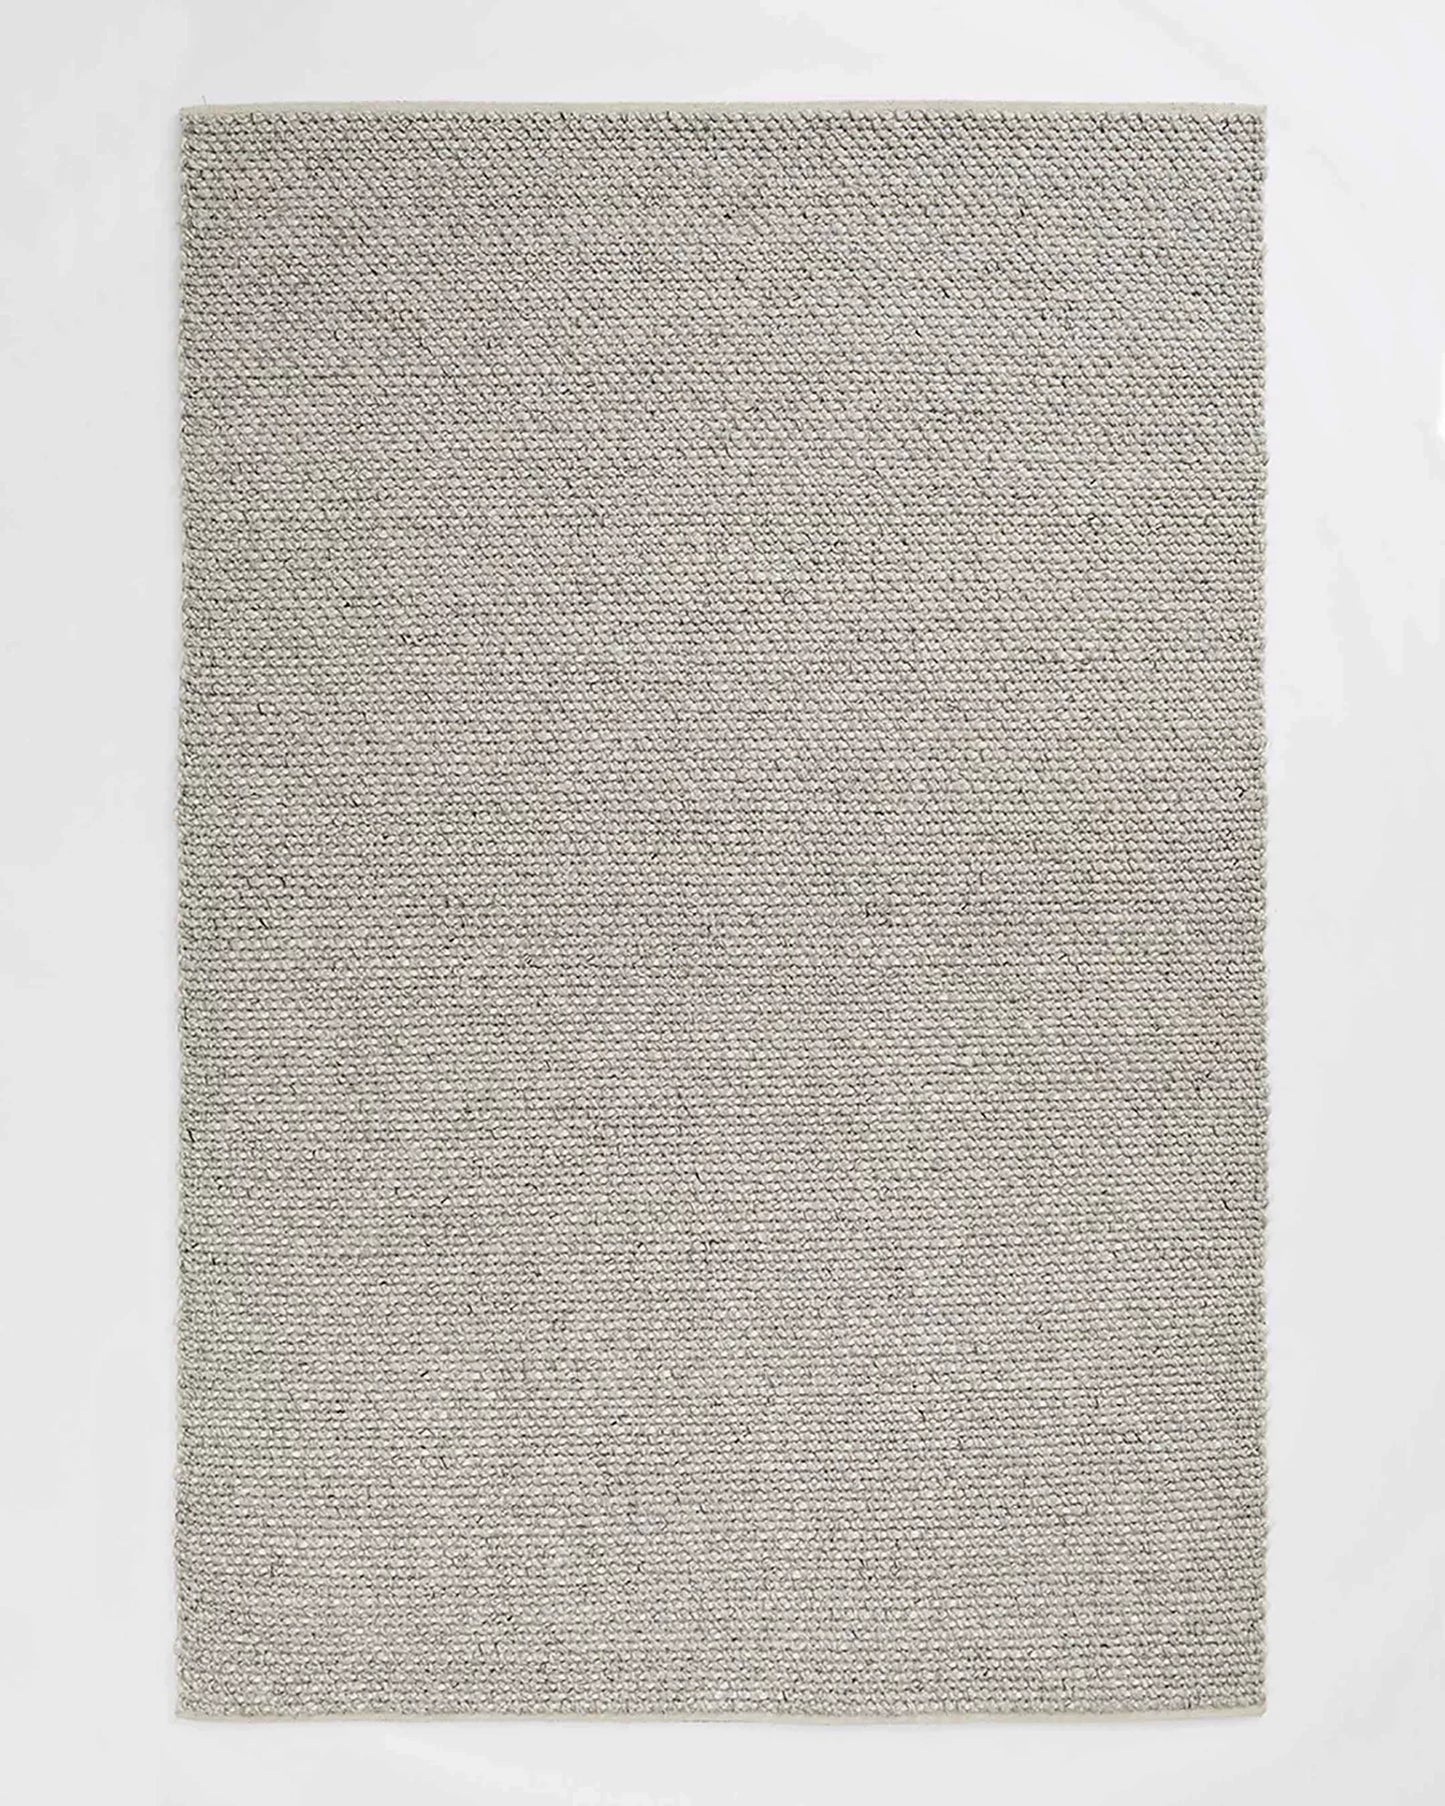 Weave Emerson wool blend rug feather 200 x 300cm